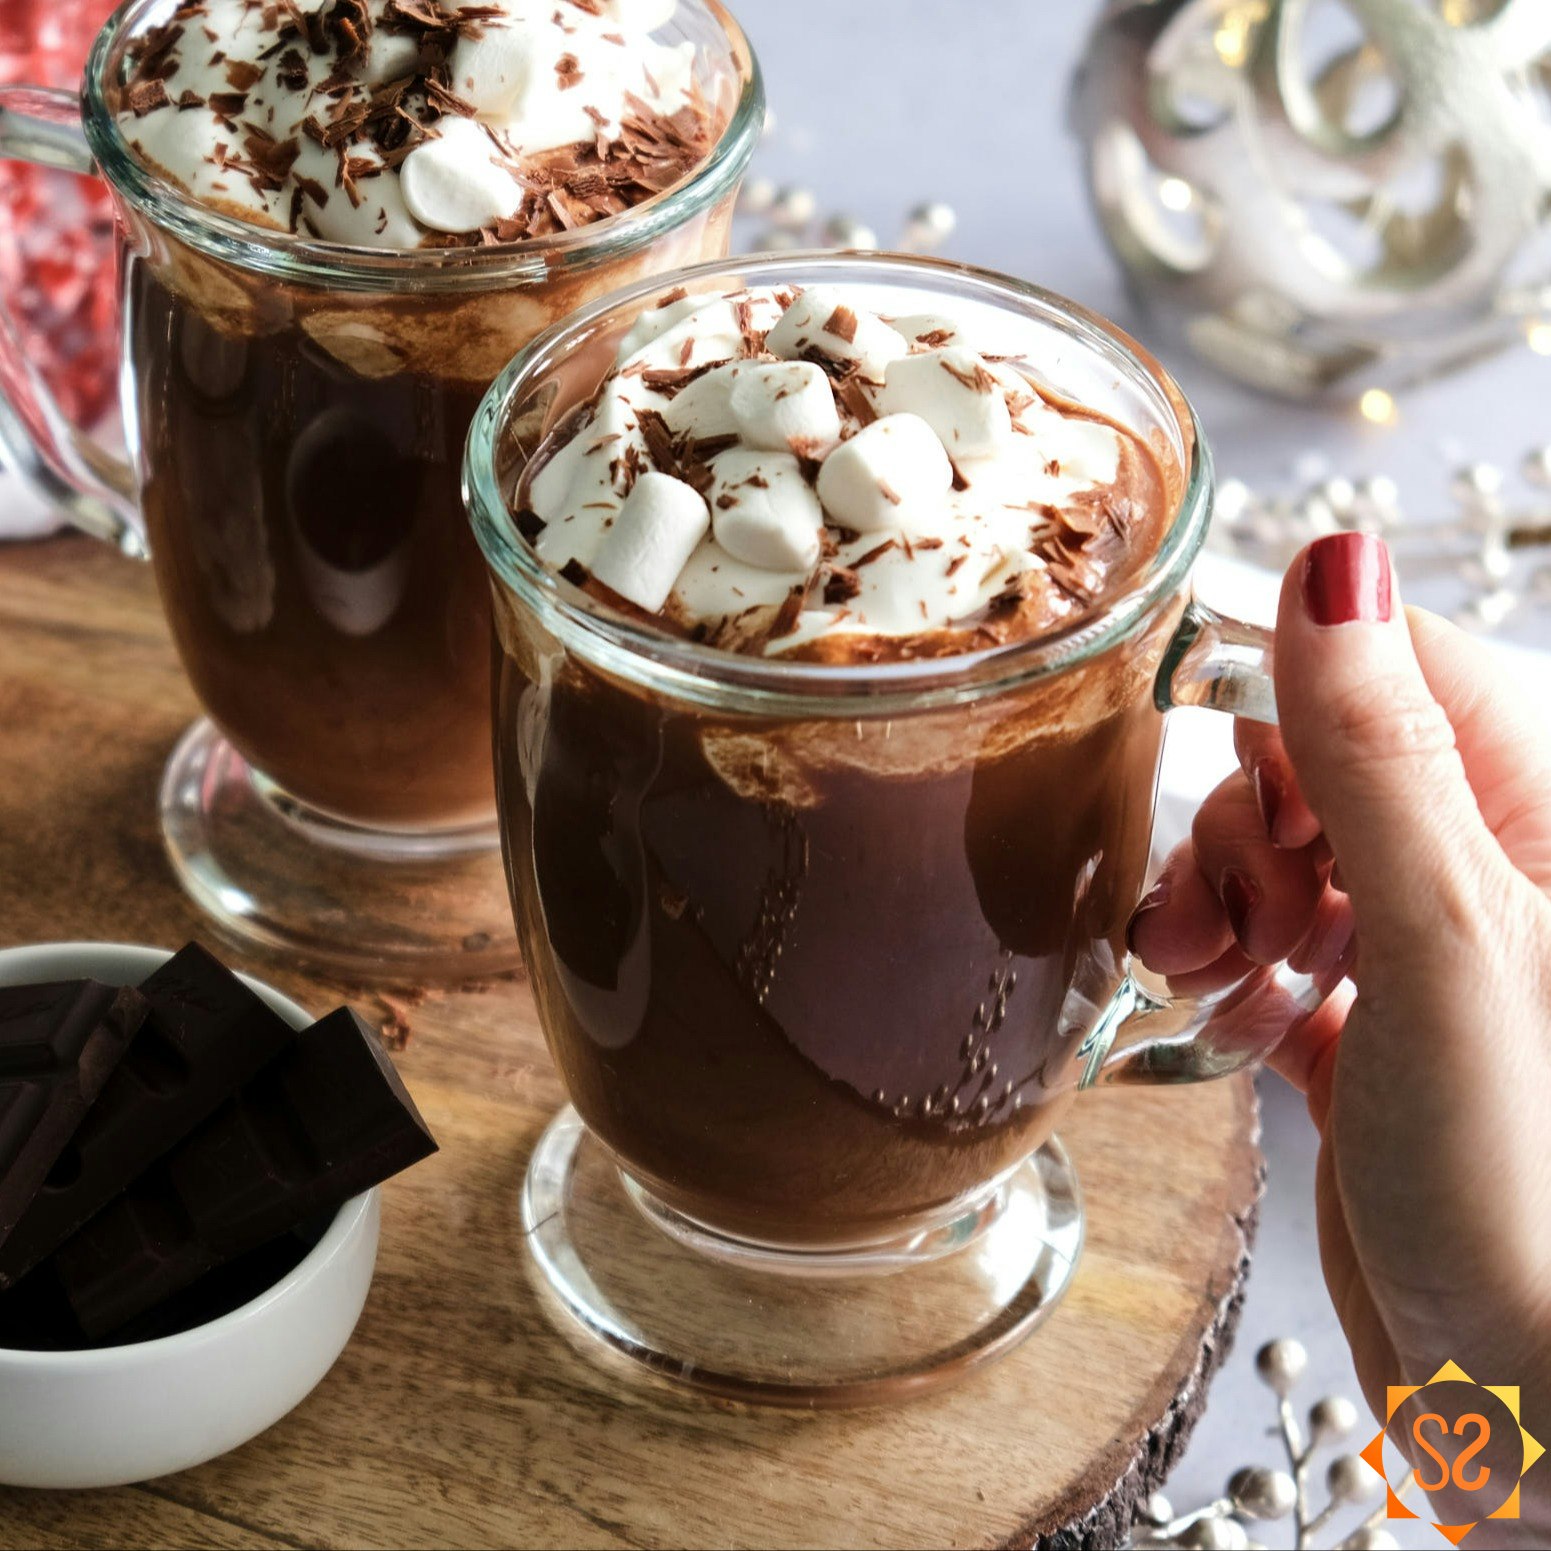 A hand holding one of two mugs of vegan hot chocolate, next to a jar of marshmallows and a dish of chocolate pieces.